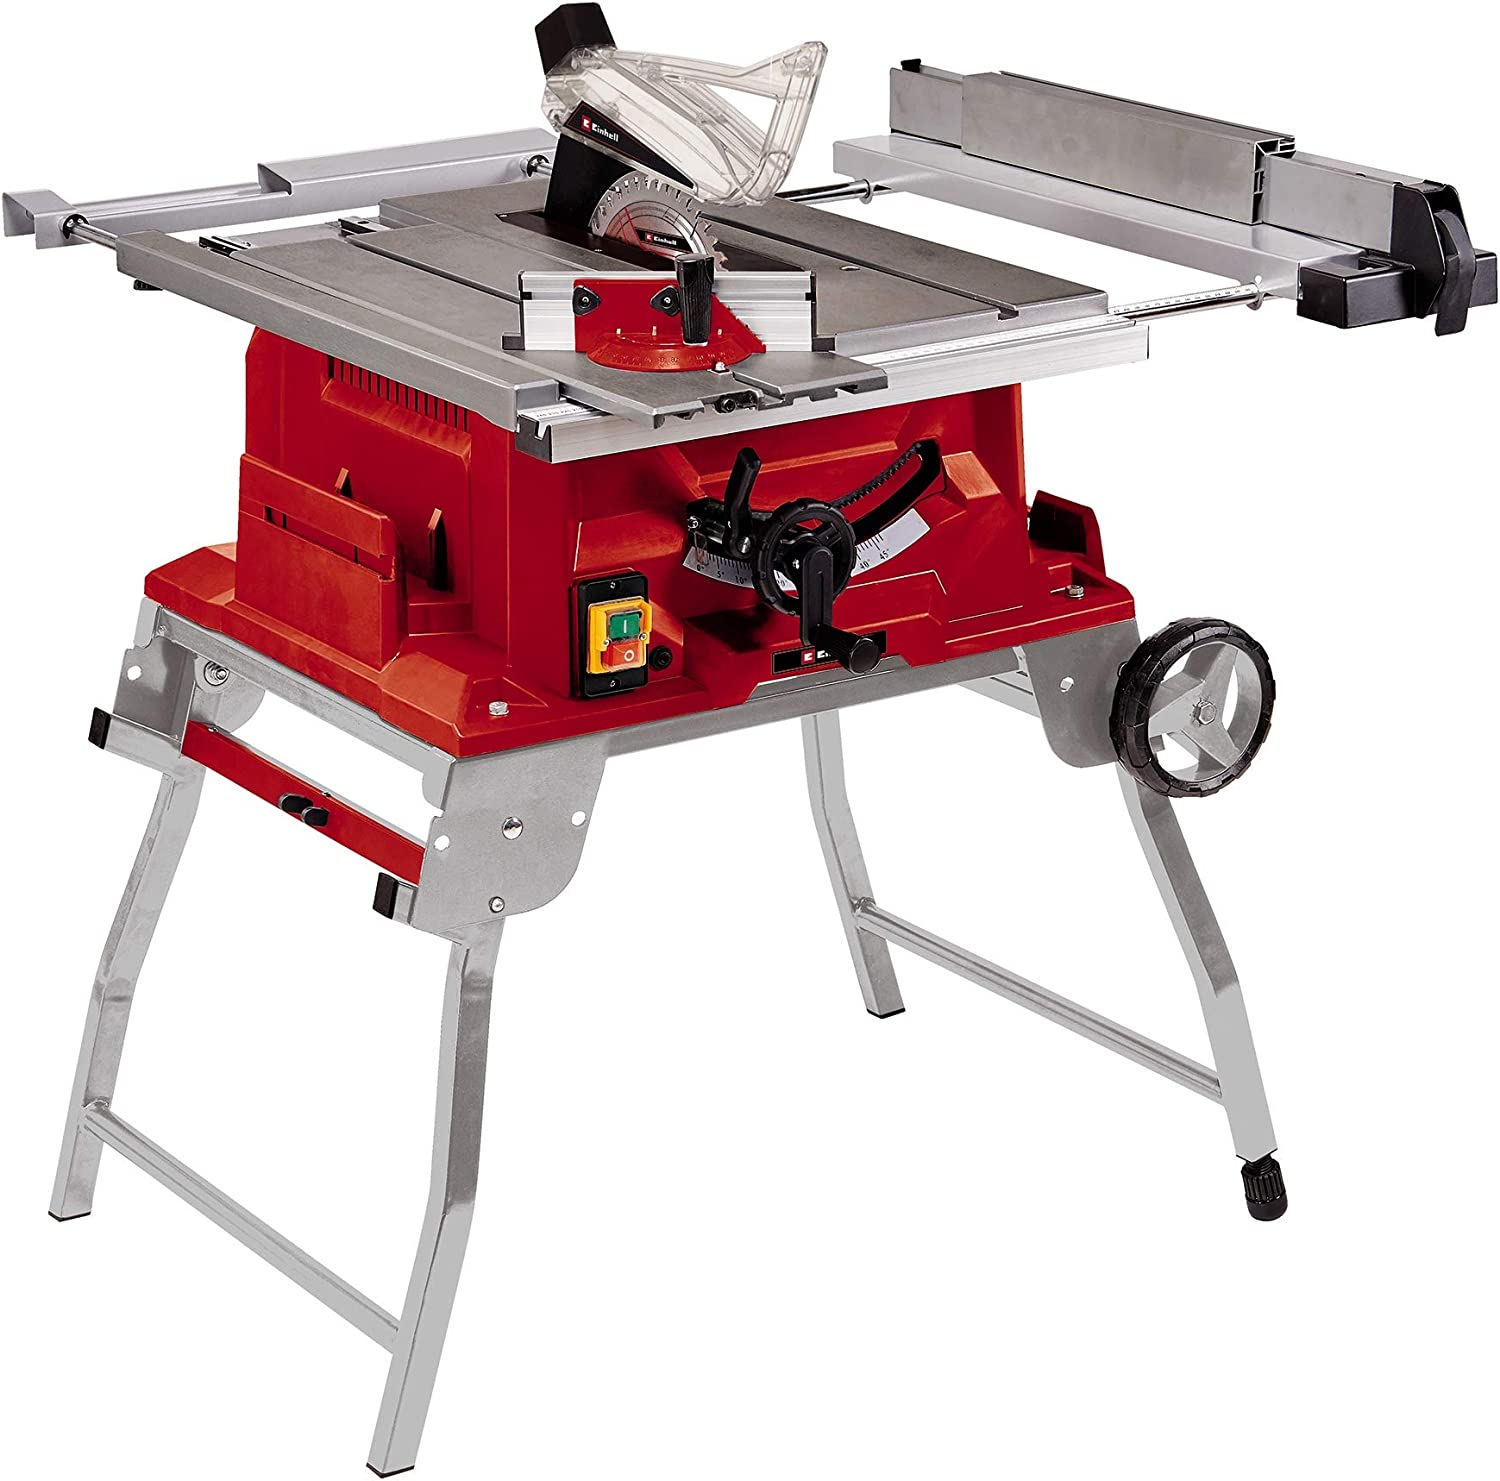 Einhell Table saw TE-CC 250 UF (red, 1,500 watts) 4340539 (4006825647518)